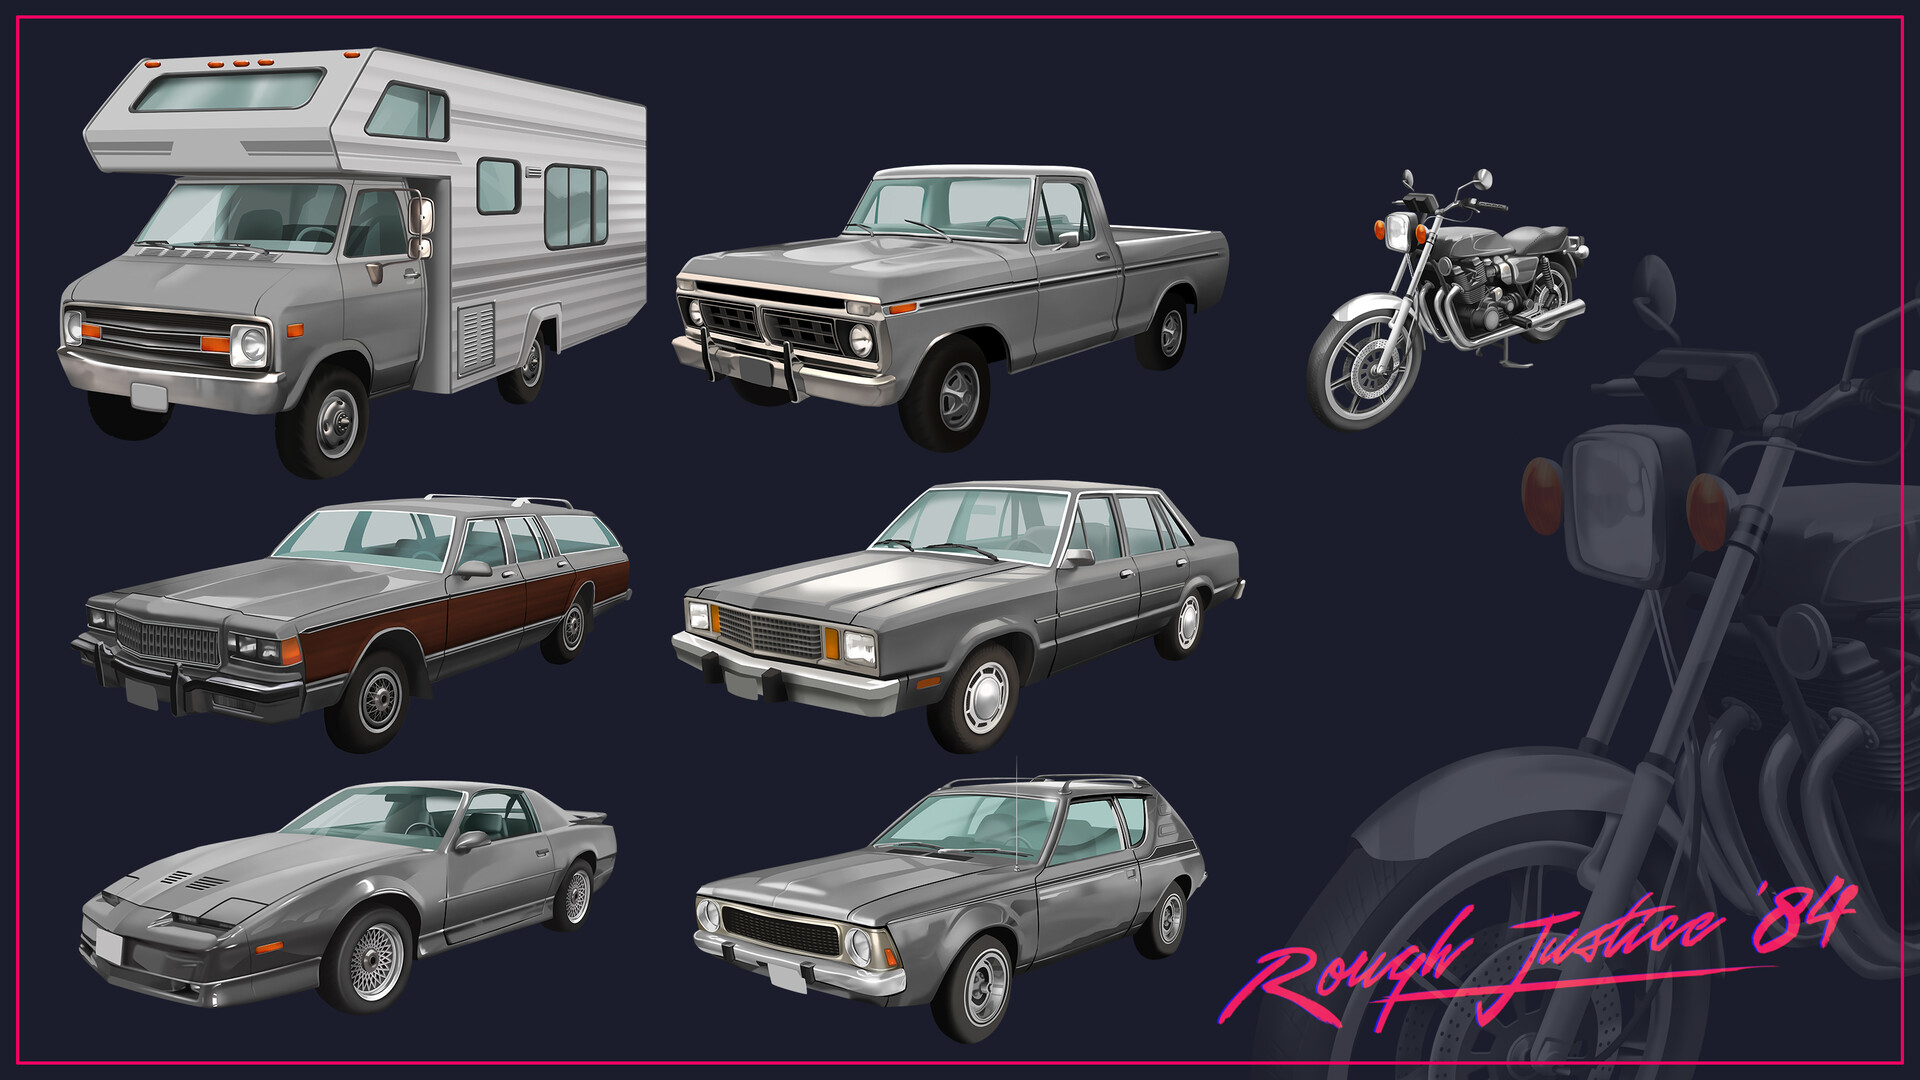 Rough Justice '84 Environments